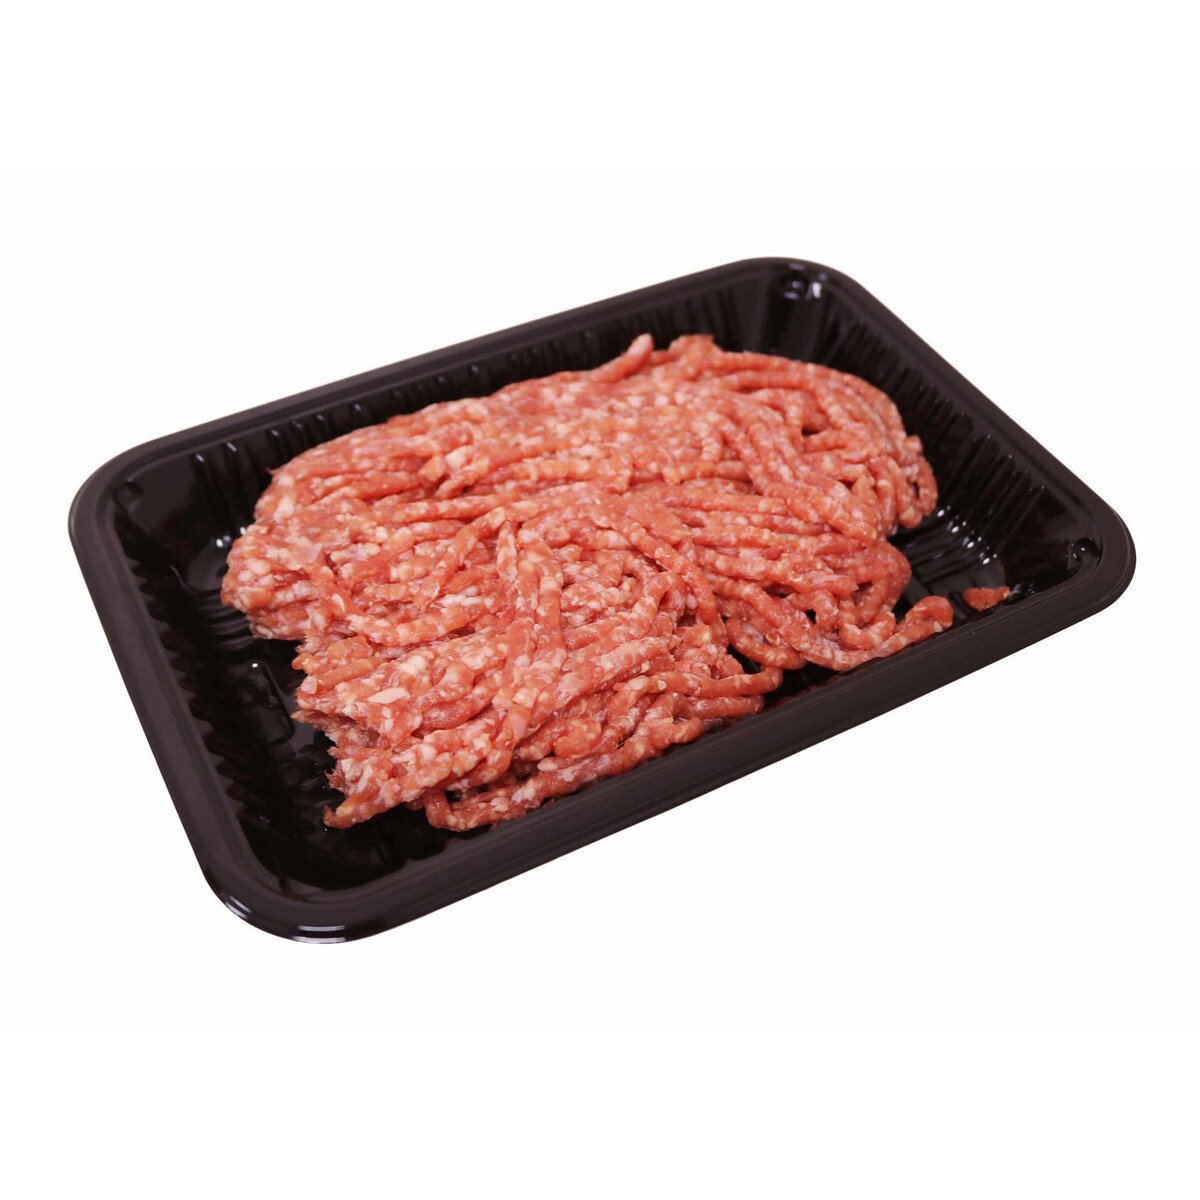 Mutton Mince 500g Approx Weight